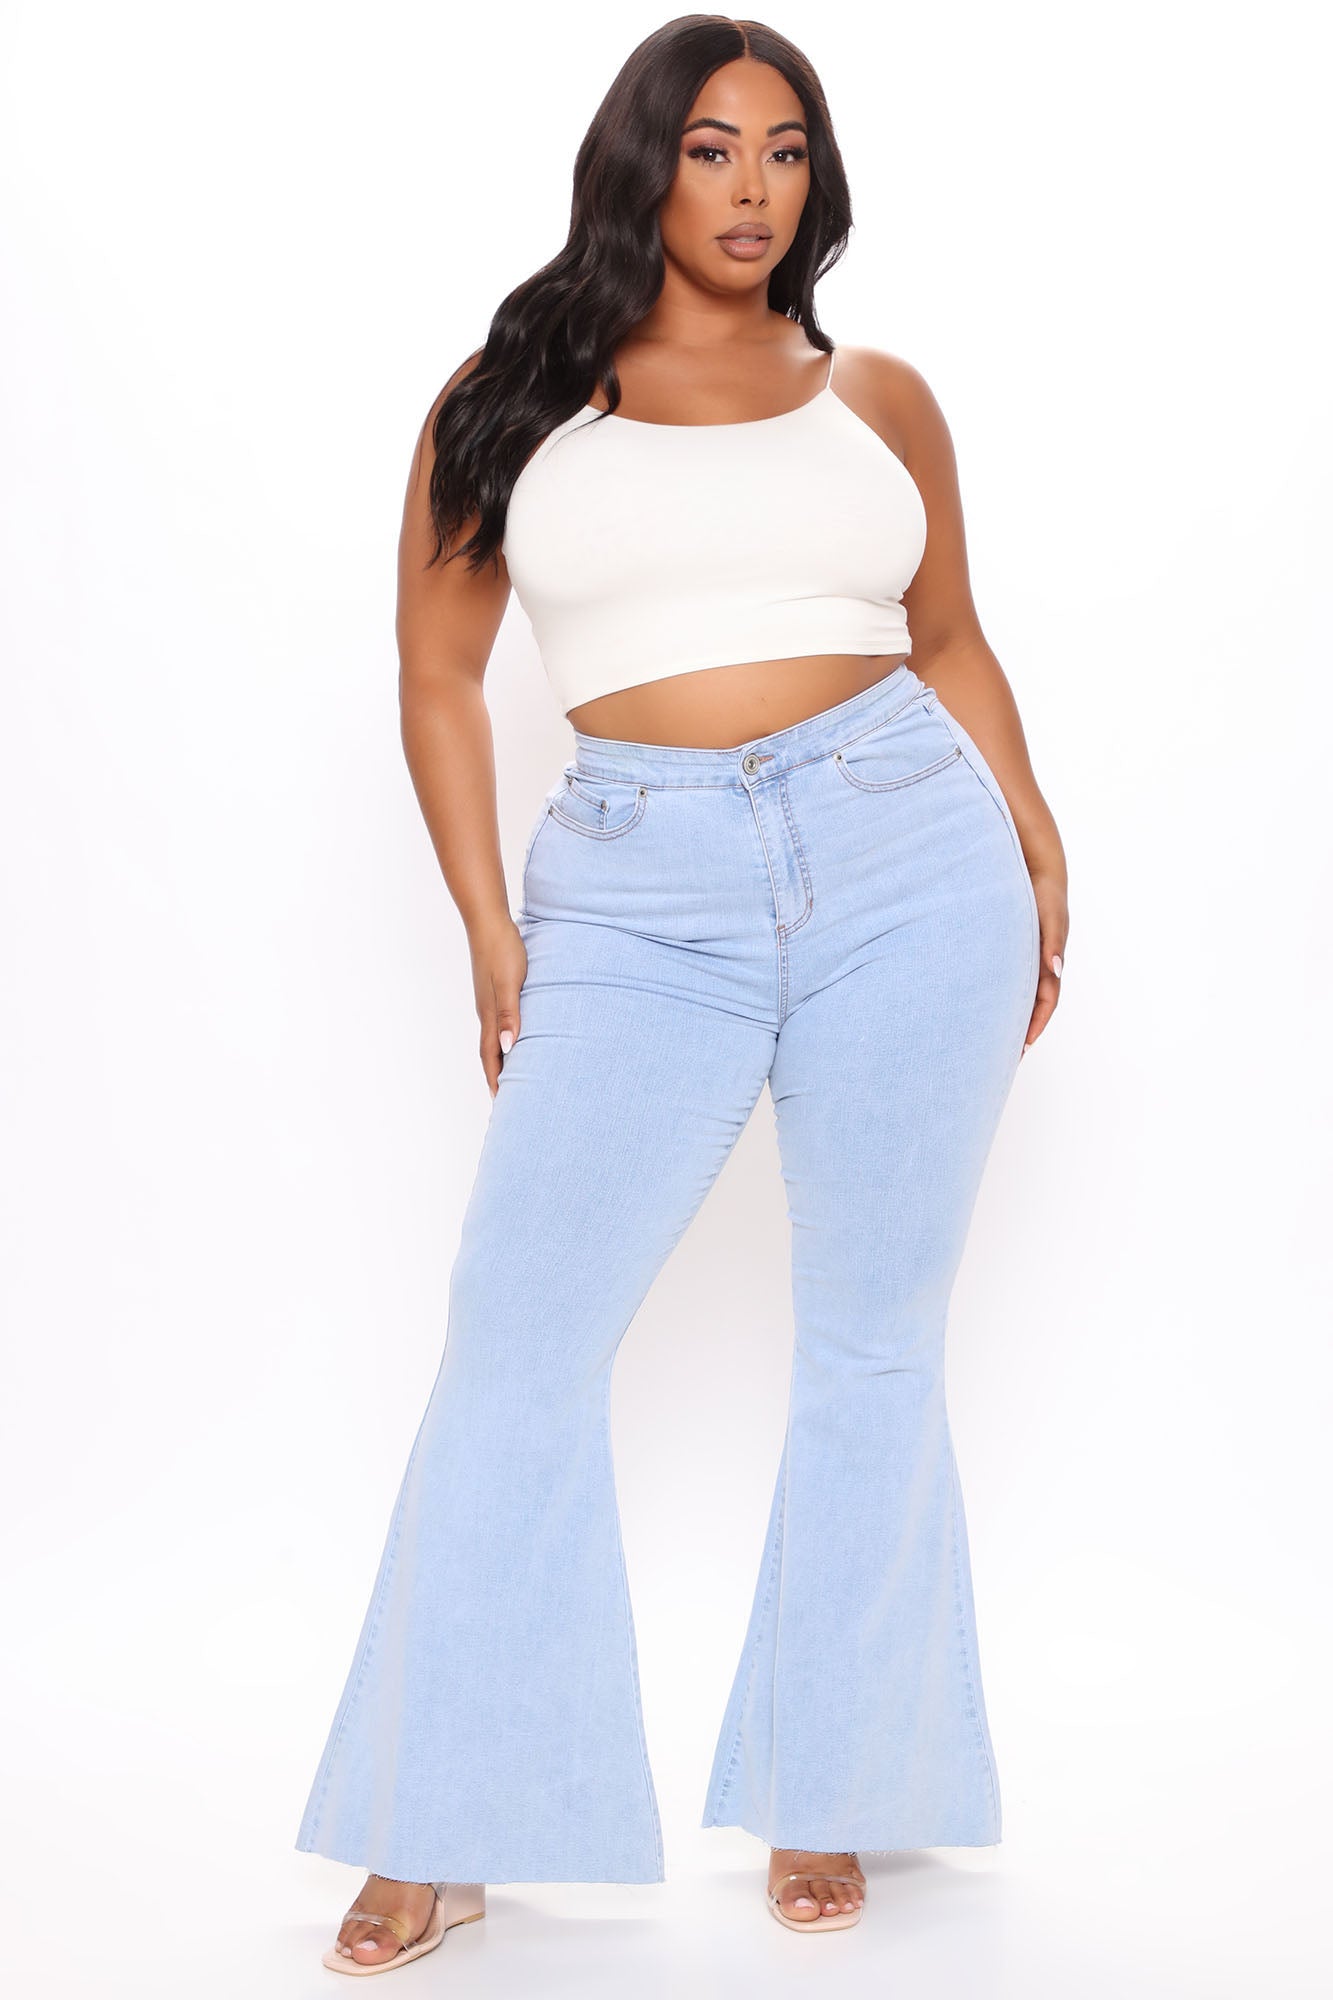 Feelin' Good Lace Up Stretch Flare Jeans - Light Blue Wash